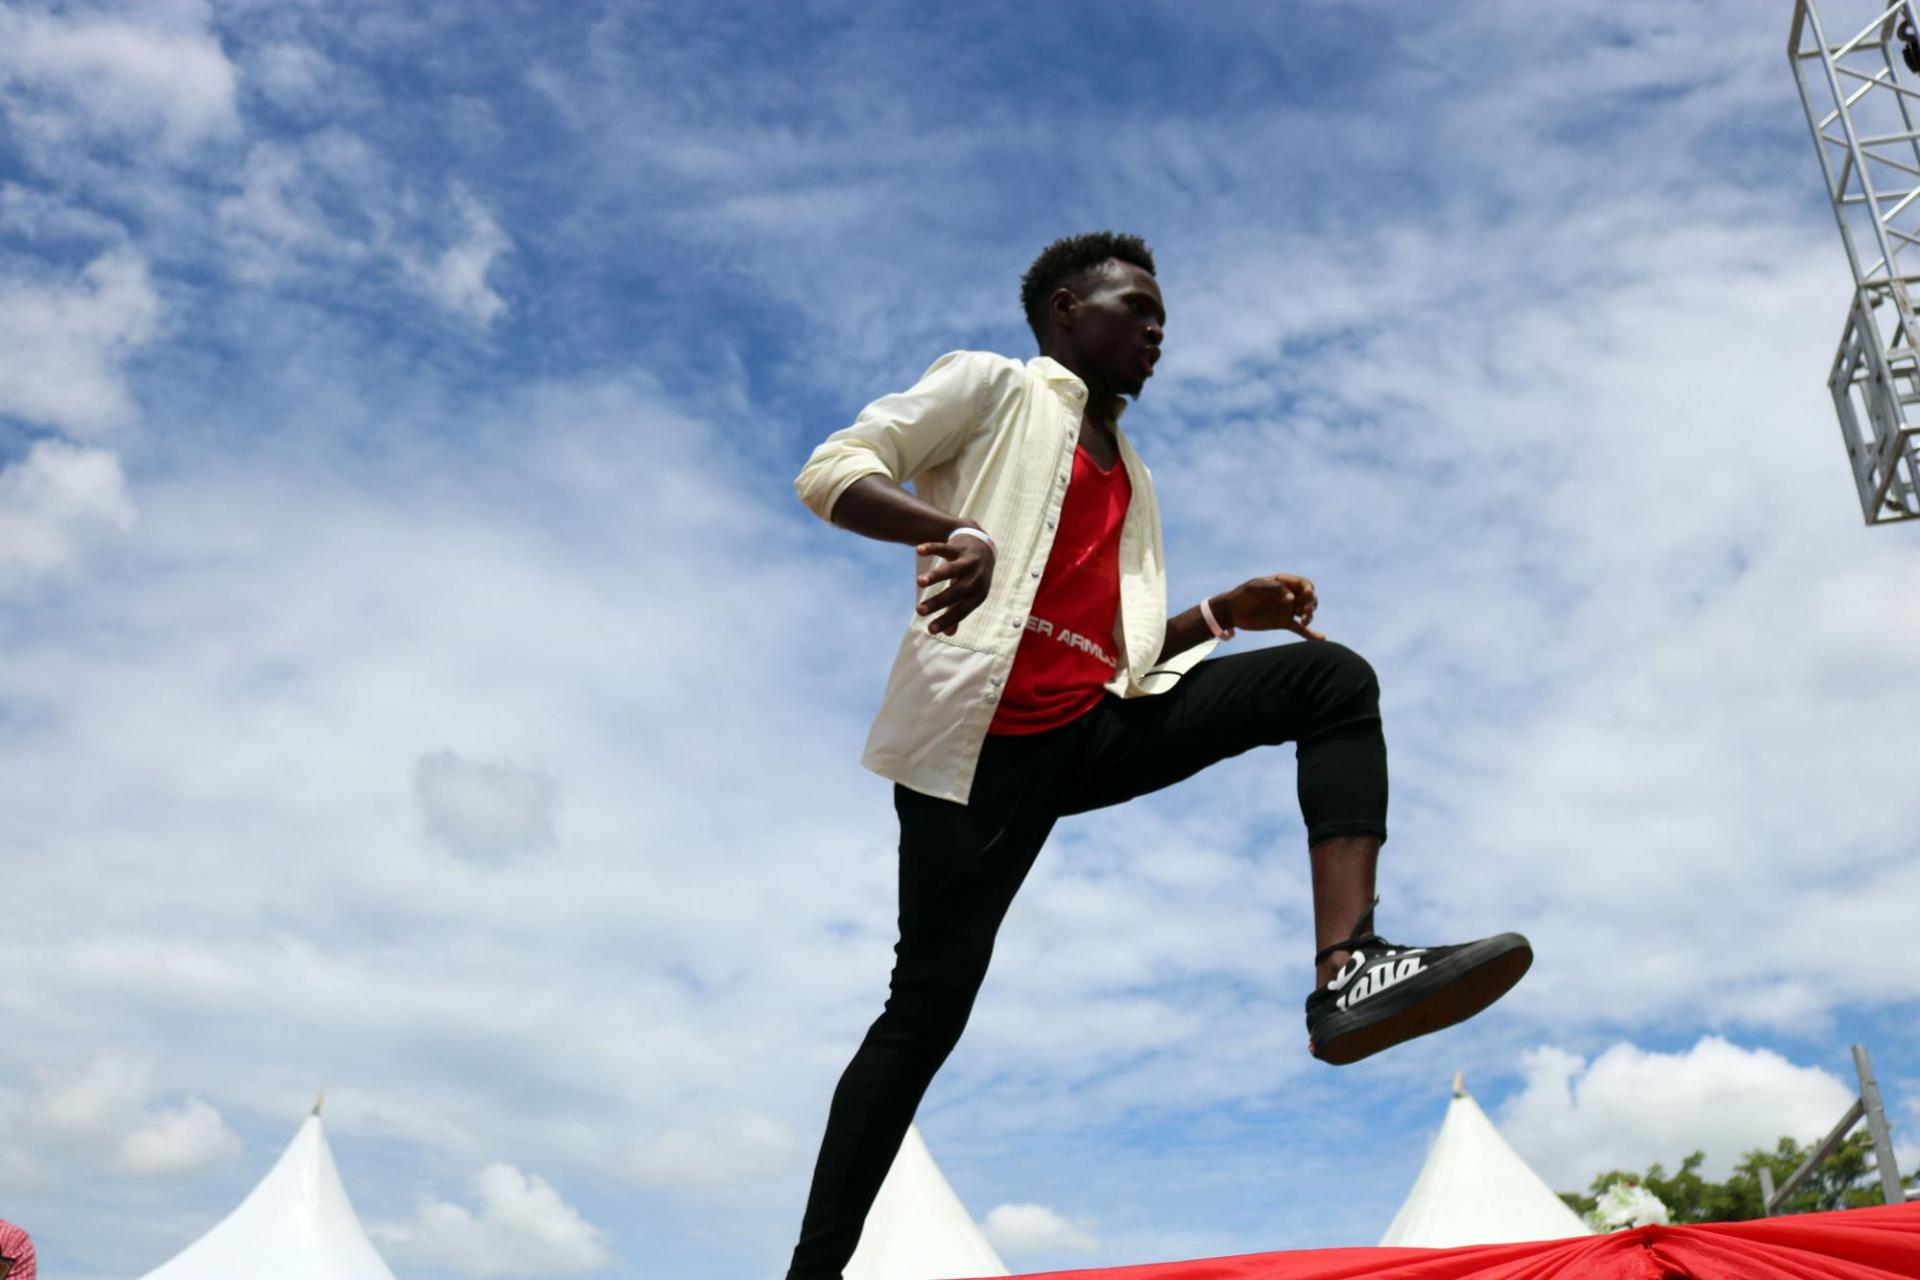 Refugees display unique talents at the Youth Talent Show | Uganda